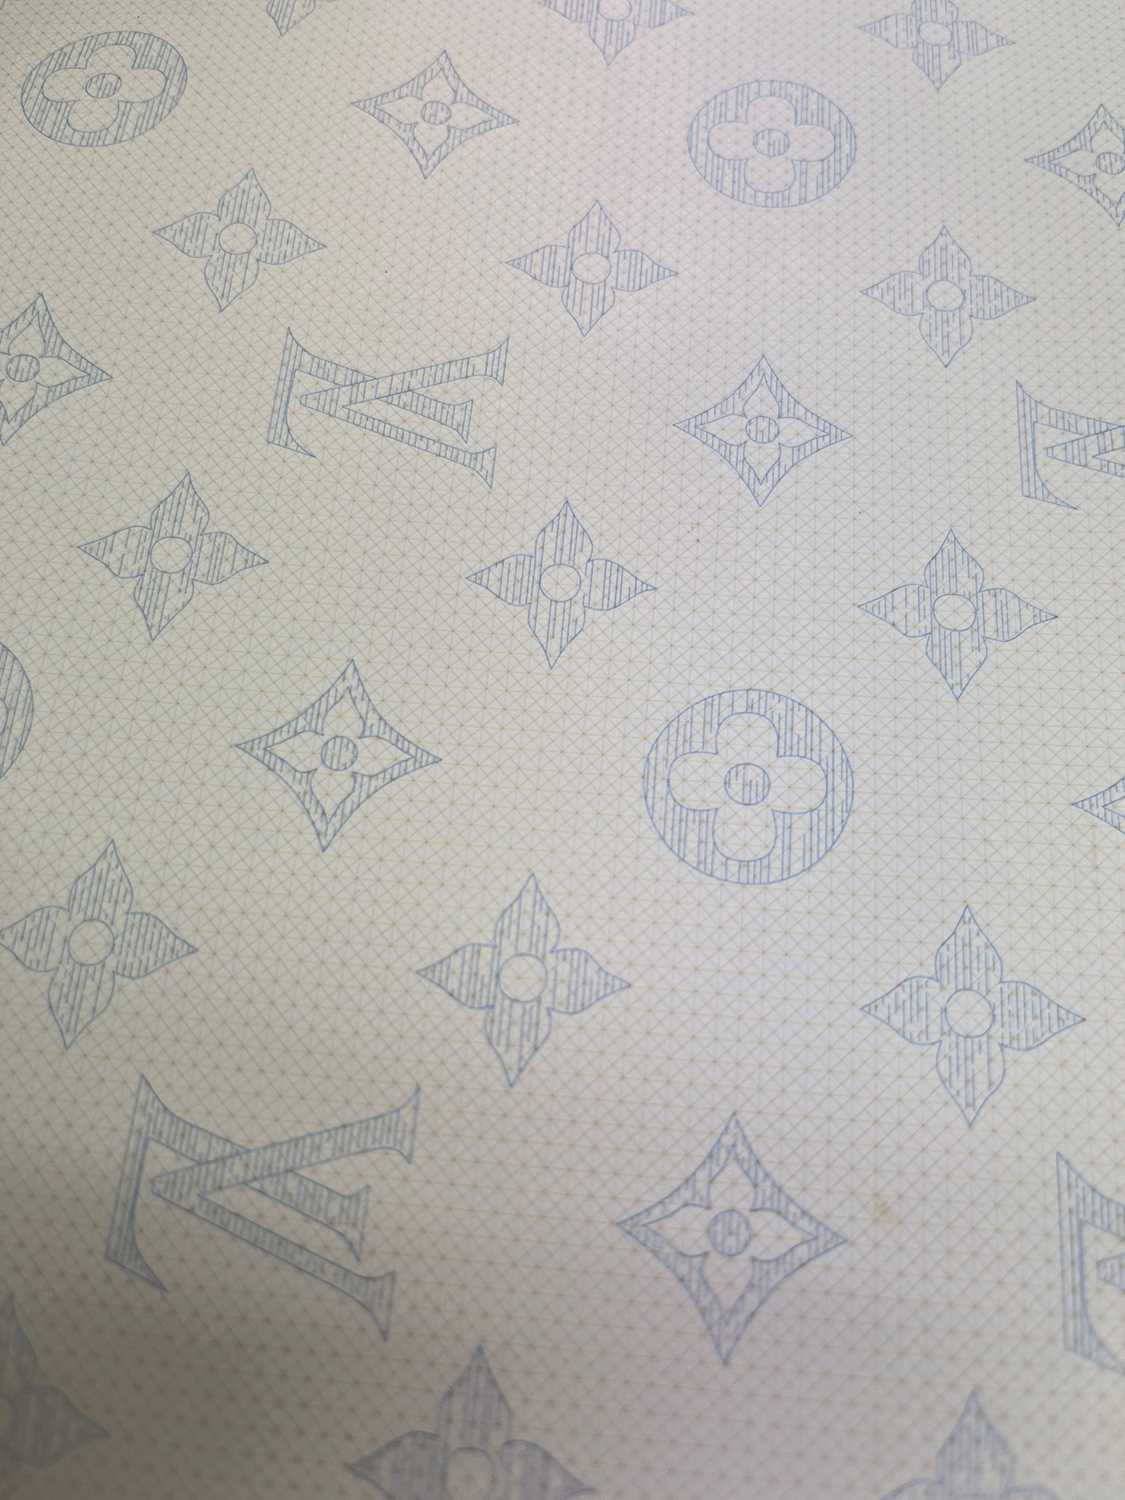 Four Louis Vuitton 160th Anniversary monogrammed paper commemorative shopping bags, - Image 5 of 7